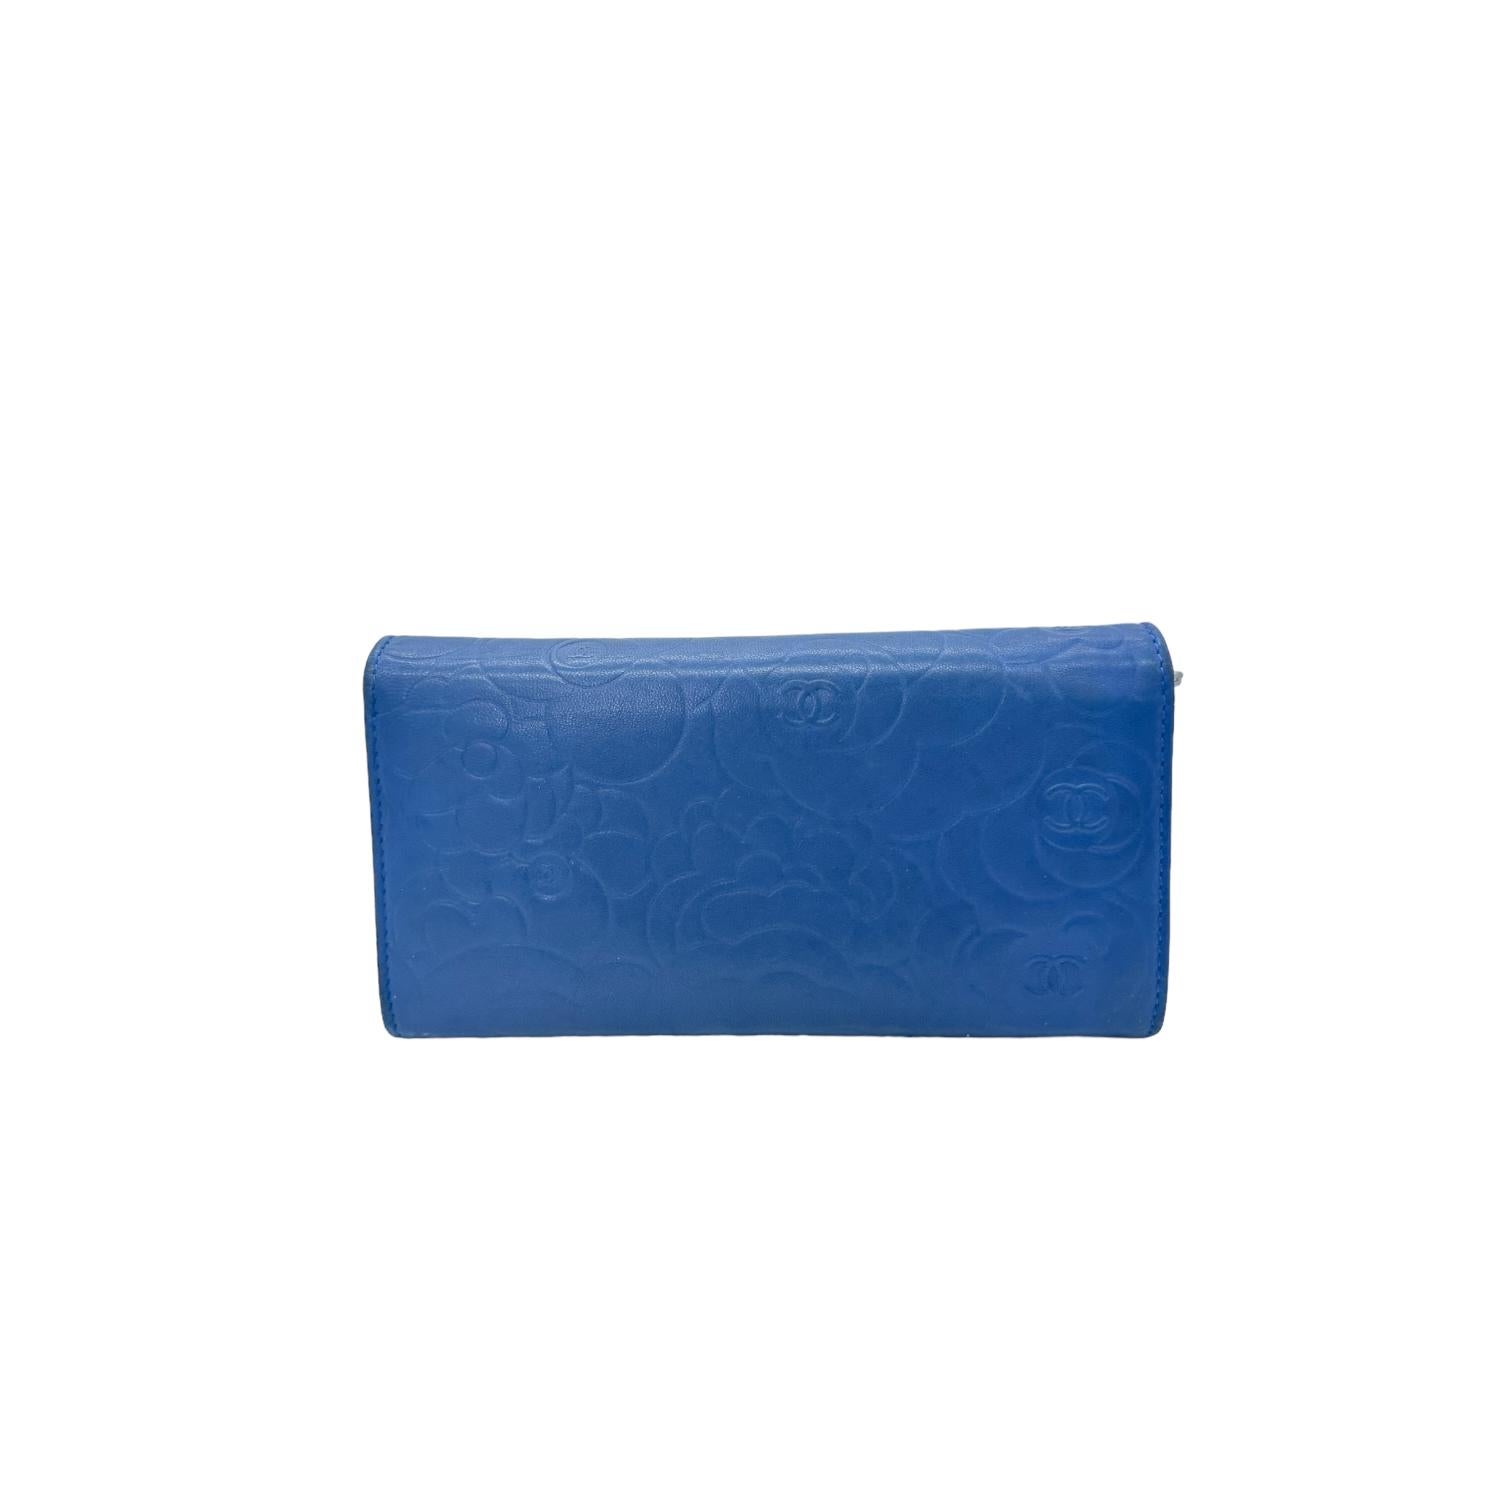 This Chanel Blue Camellia lambskin leather snap wallet is perfect if you are seeking something chic and luxurious to organize your essentials such as bills, credit cards and coins. It features Silver-tone hardware along with 12 card slots, two bill